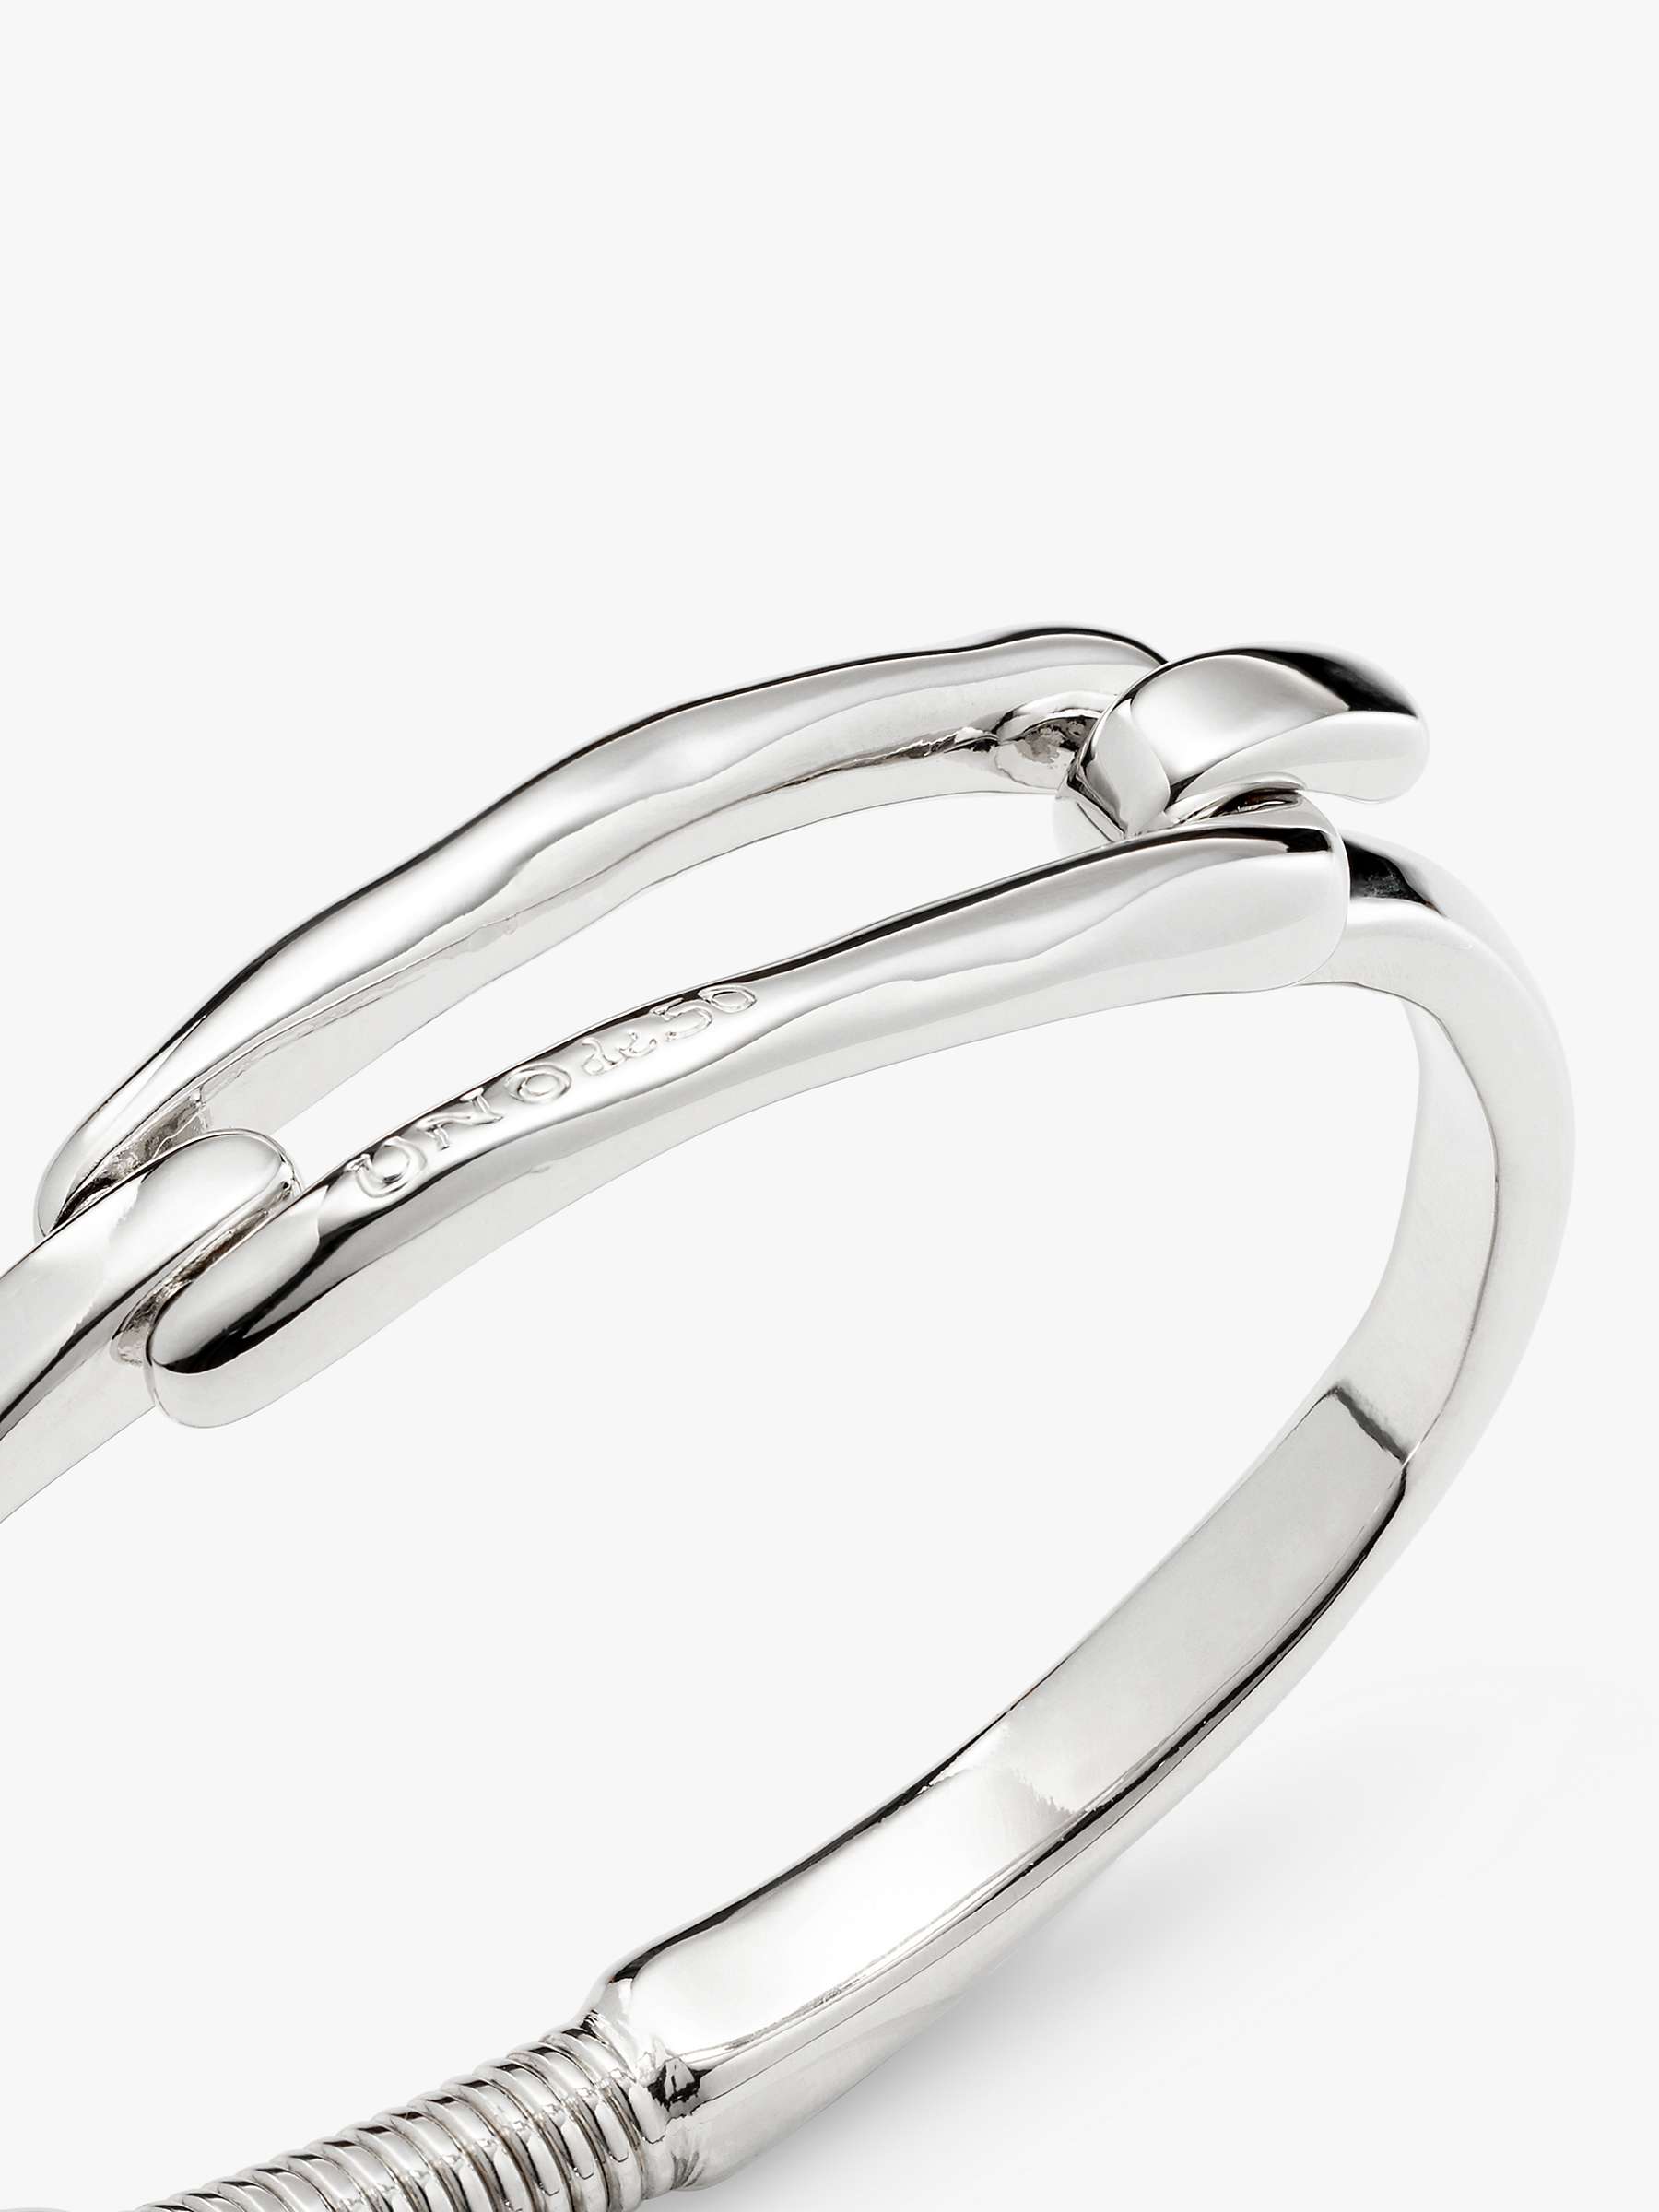 Buy UNOde50 Elongated Clasp Bangle, Silver Online at johnlewis.com